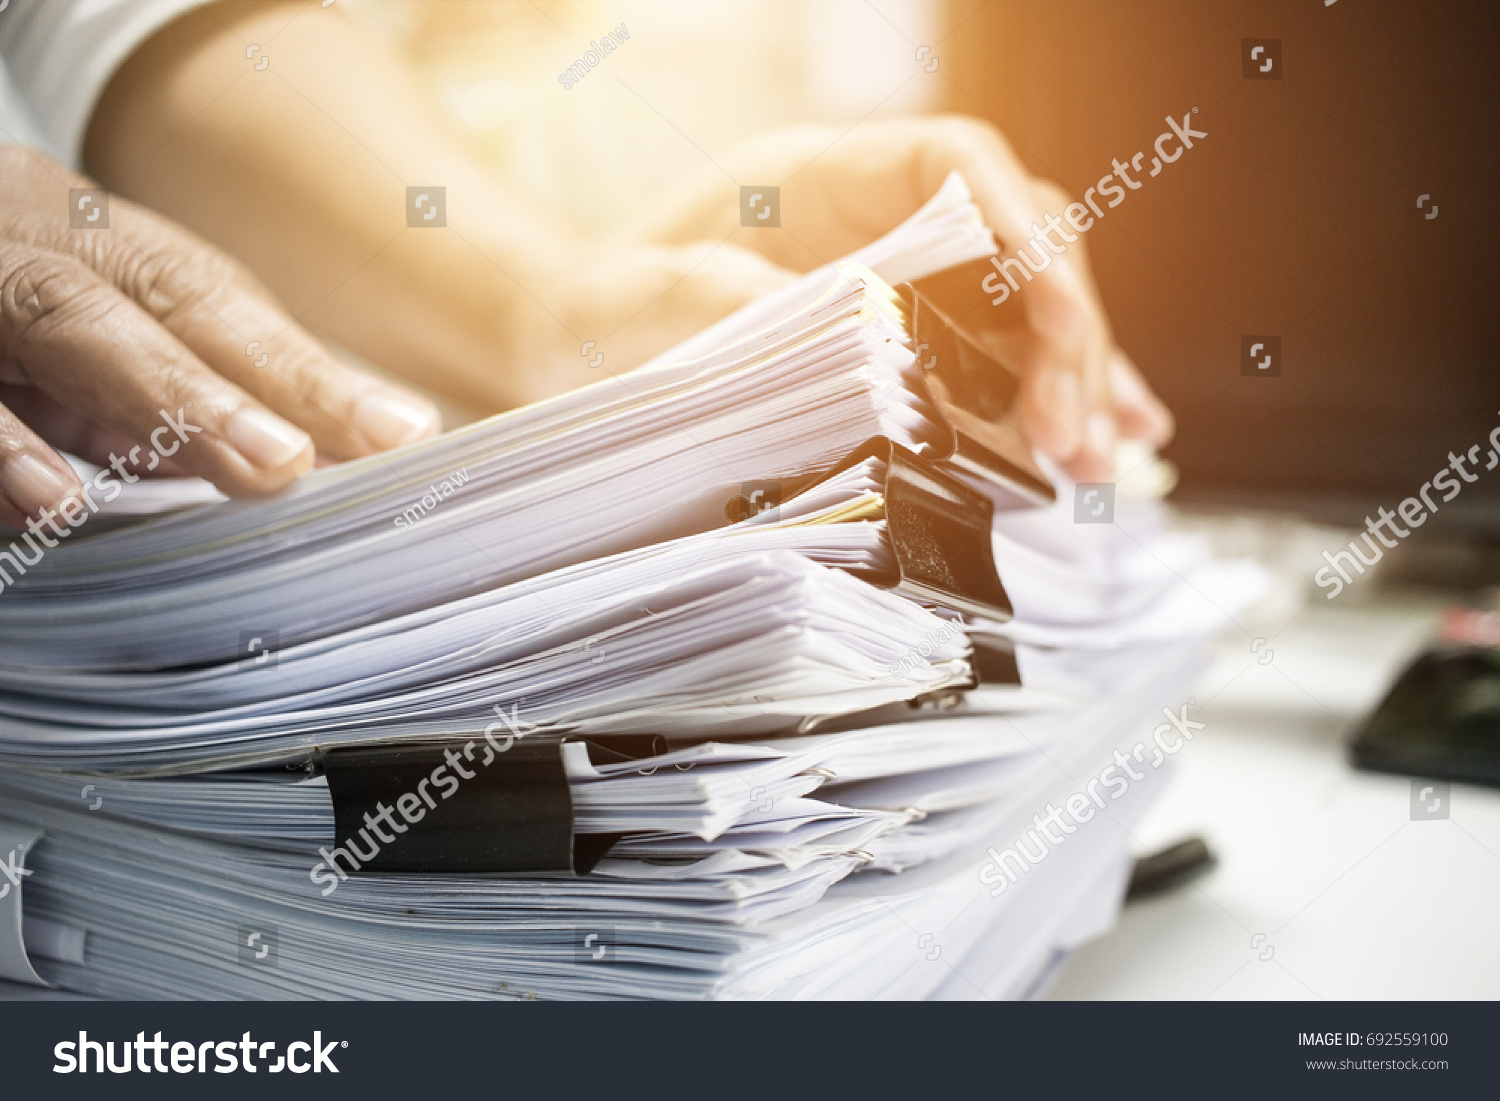 Work from Home, Businessman hands working in Stacks of paper files for searching information on work desk home office, business report papers,piles of unfinished documents achieves with clips indoor. #692559100